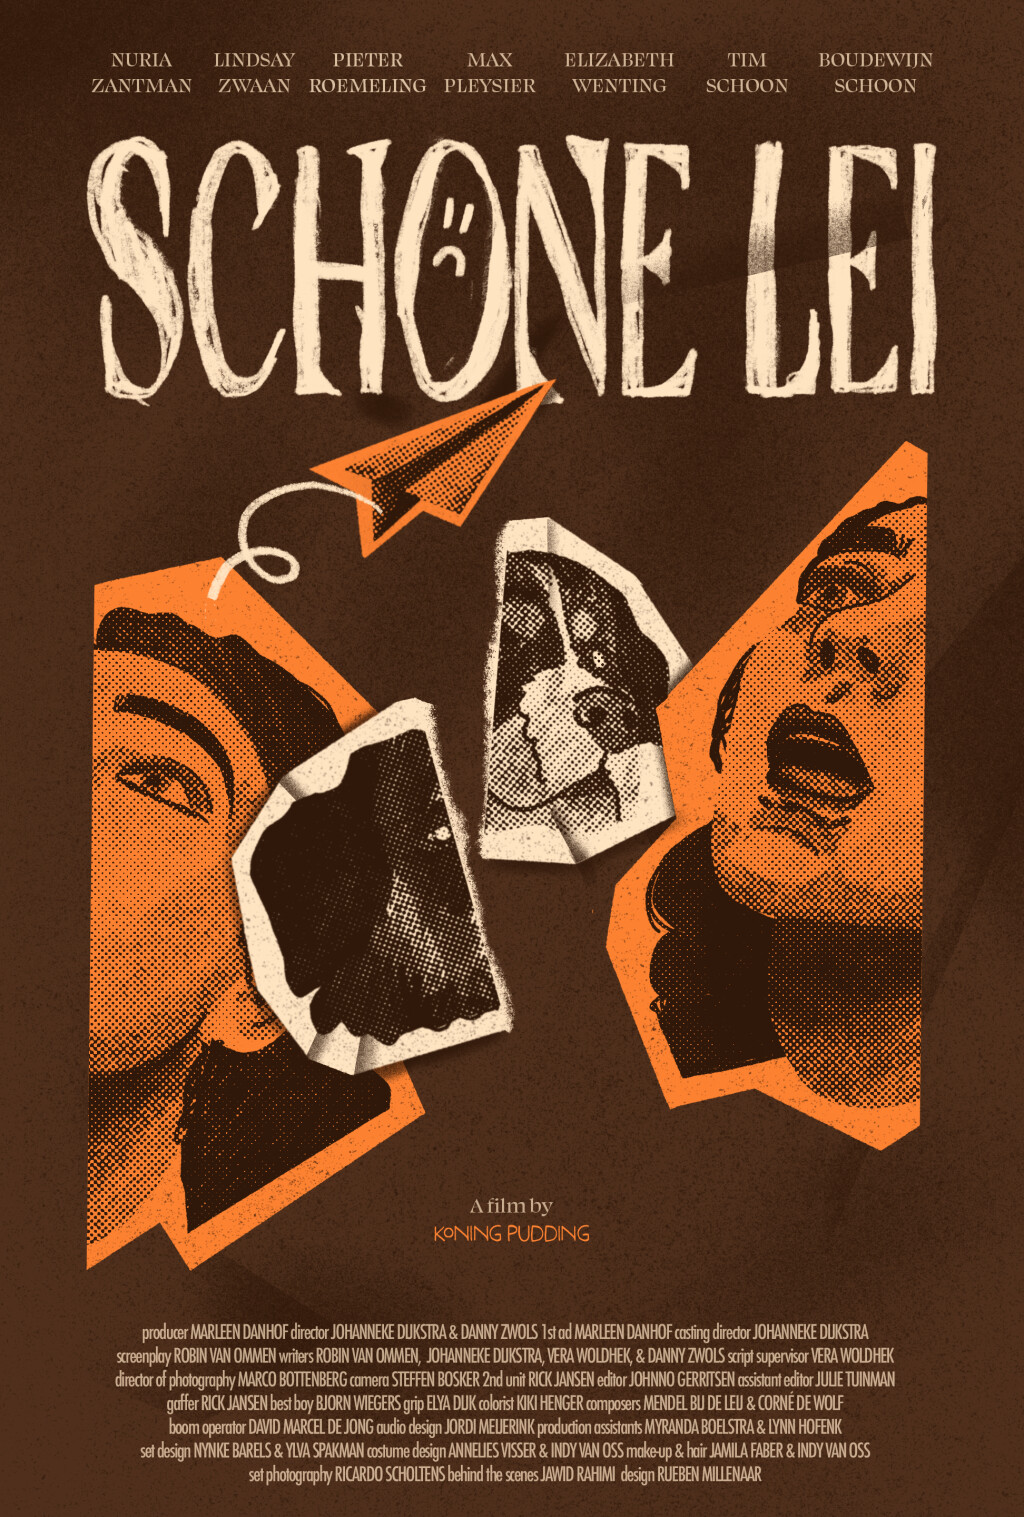 Filmposter for Schone Lei